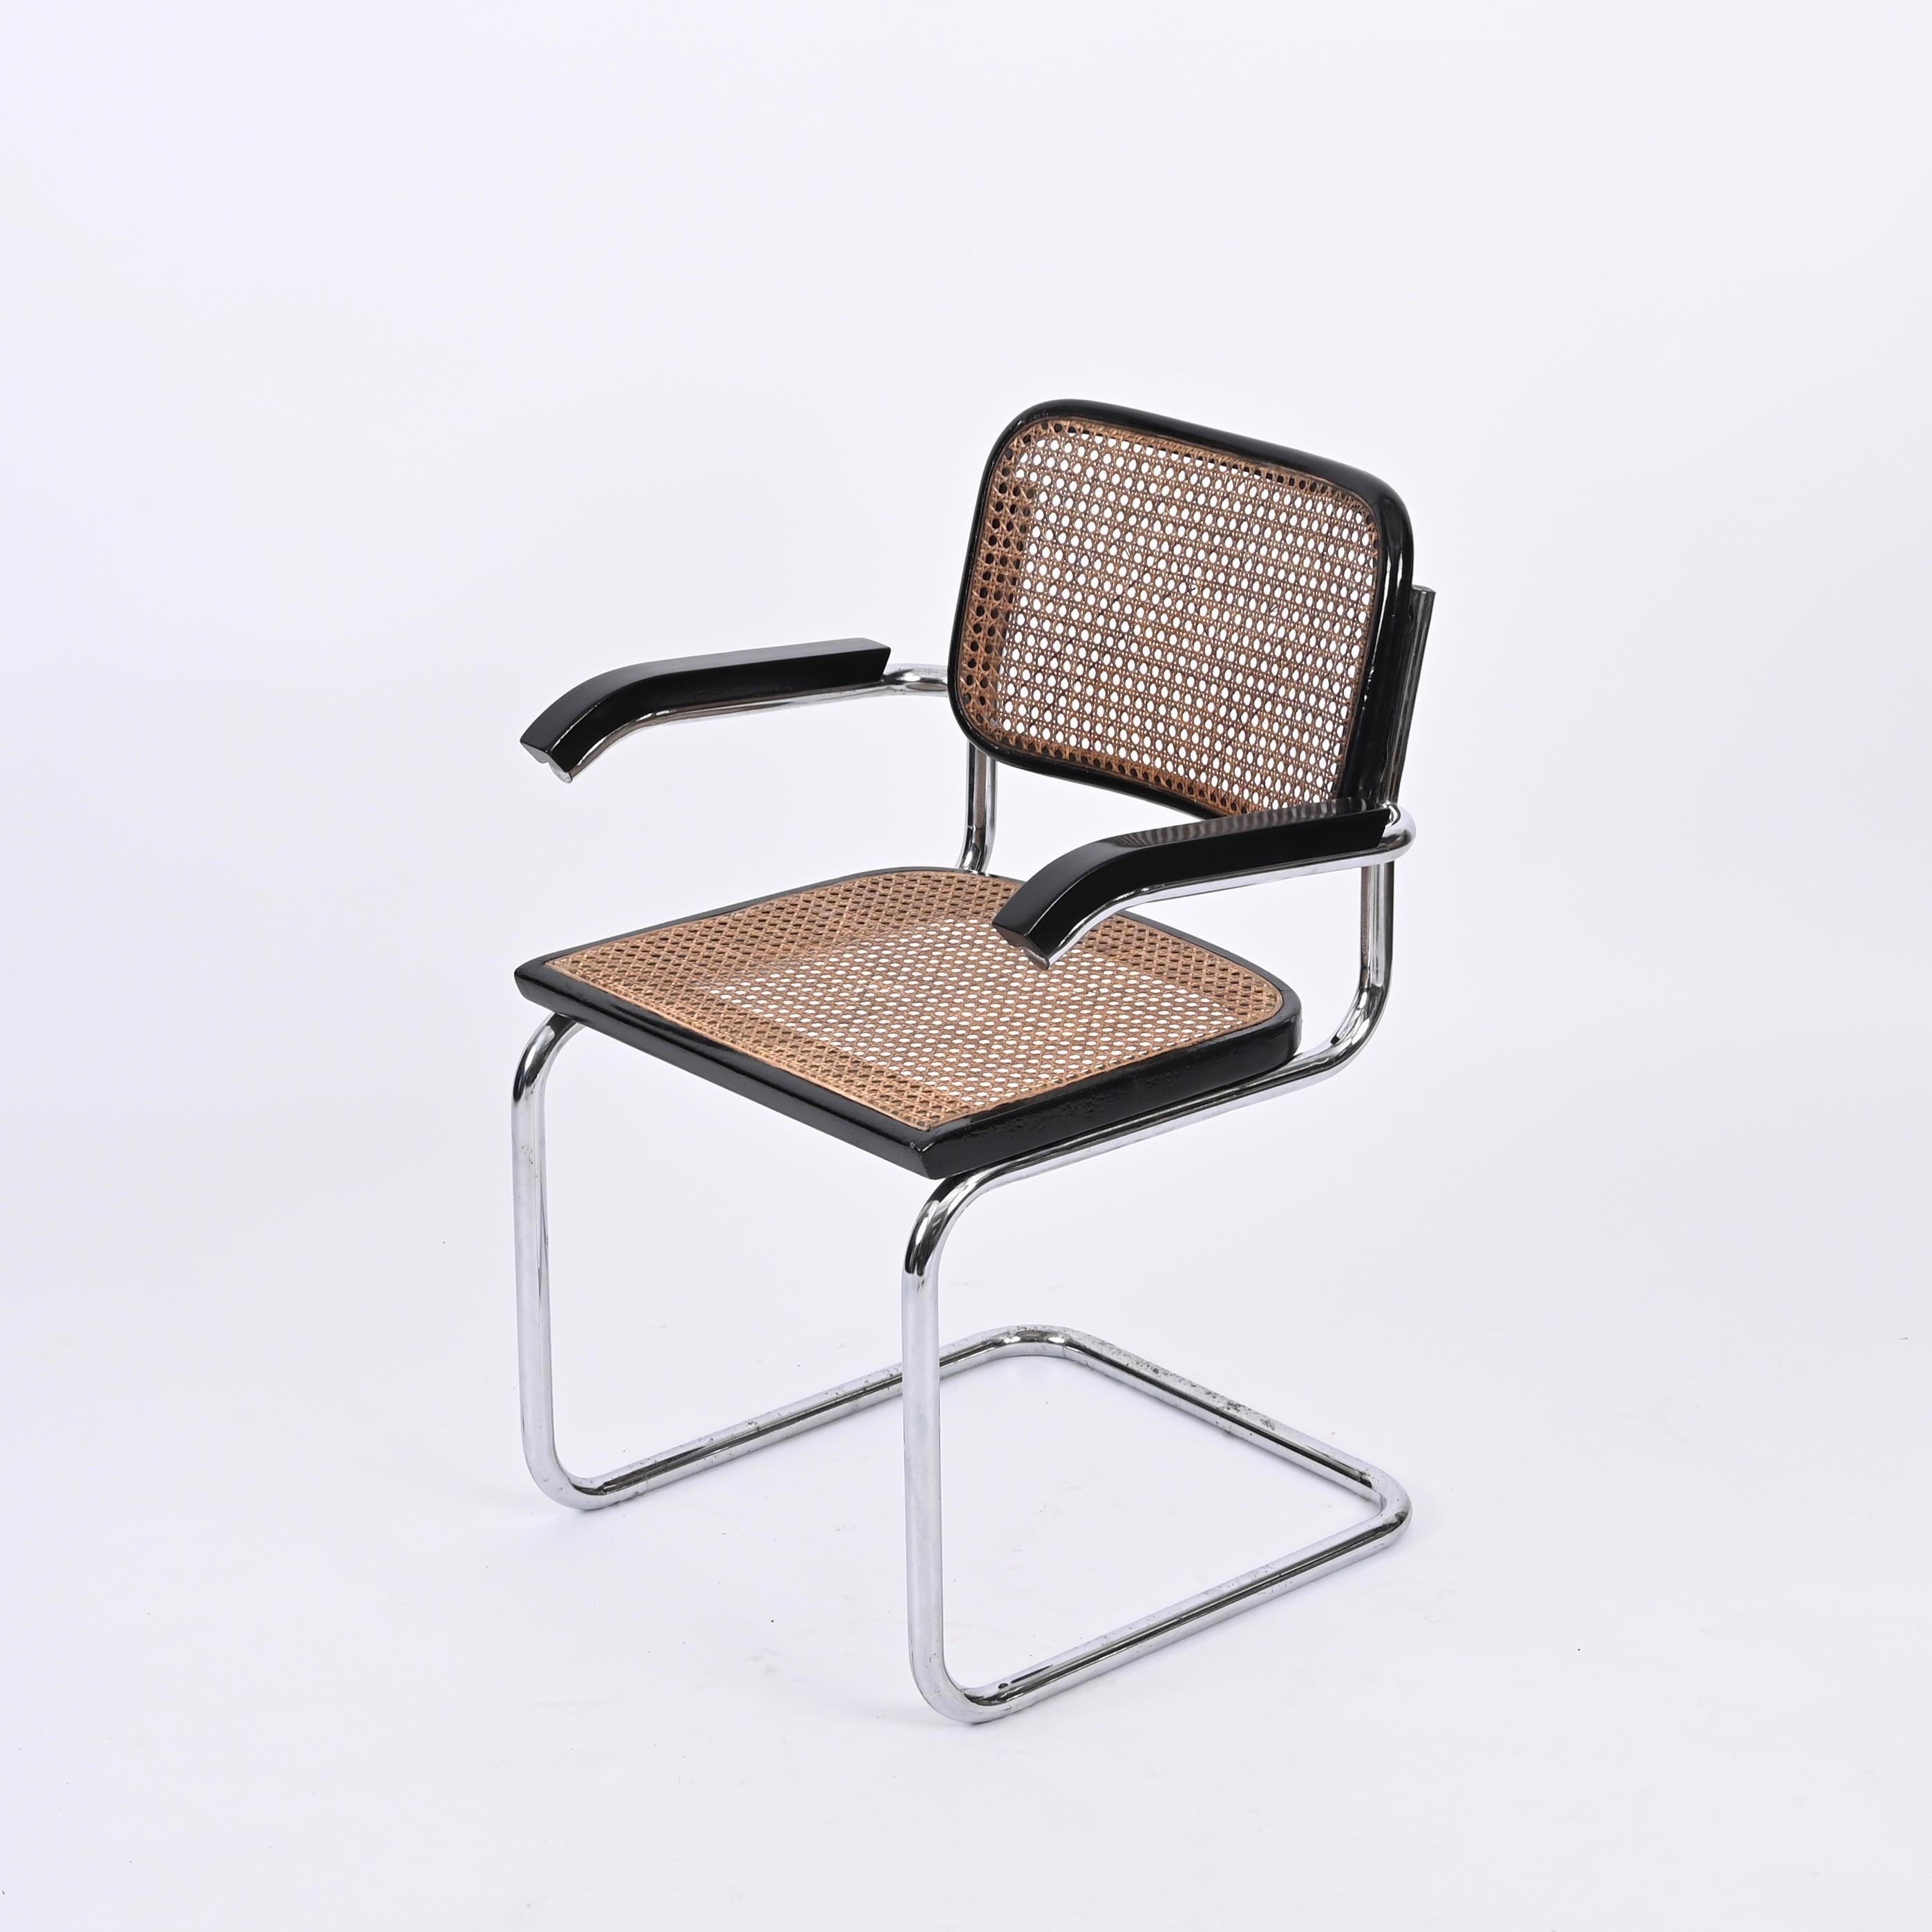 Gorgeous mid-century Cesca armchair in chromed metal and woven wicker chairs. These beautiful chair was designed by Marcel Breuer and produced by Gavina in Italy during the 1960s.

This iconic chair has an s-shaped tube structure made of chromed